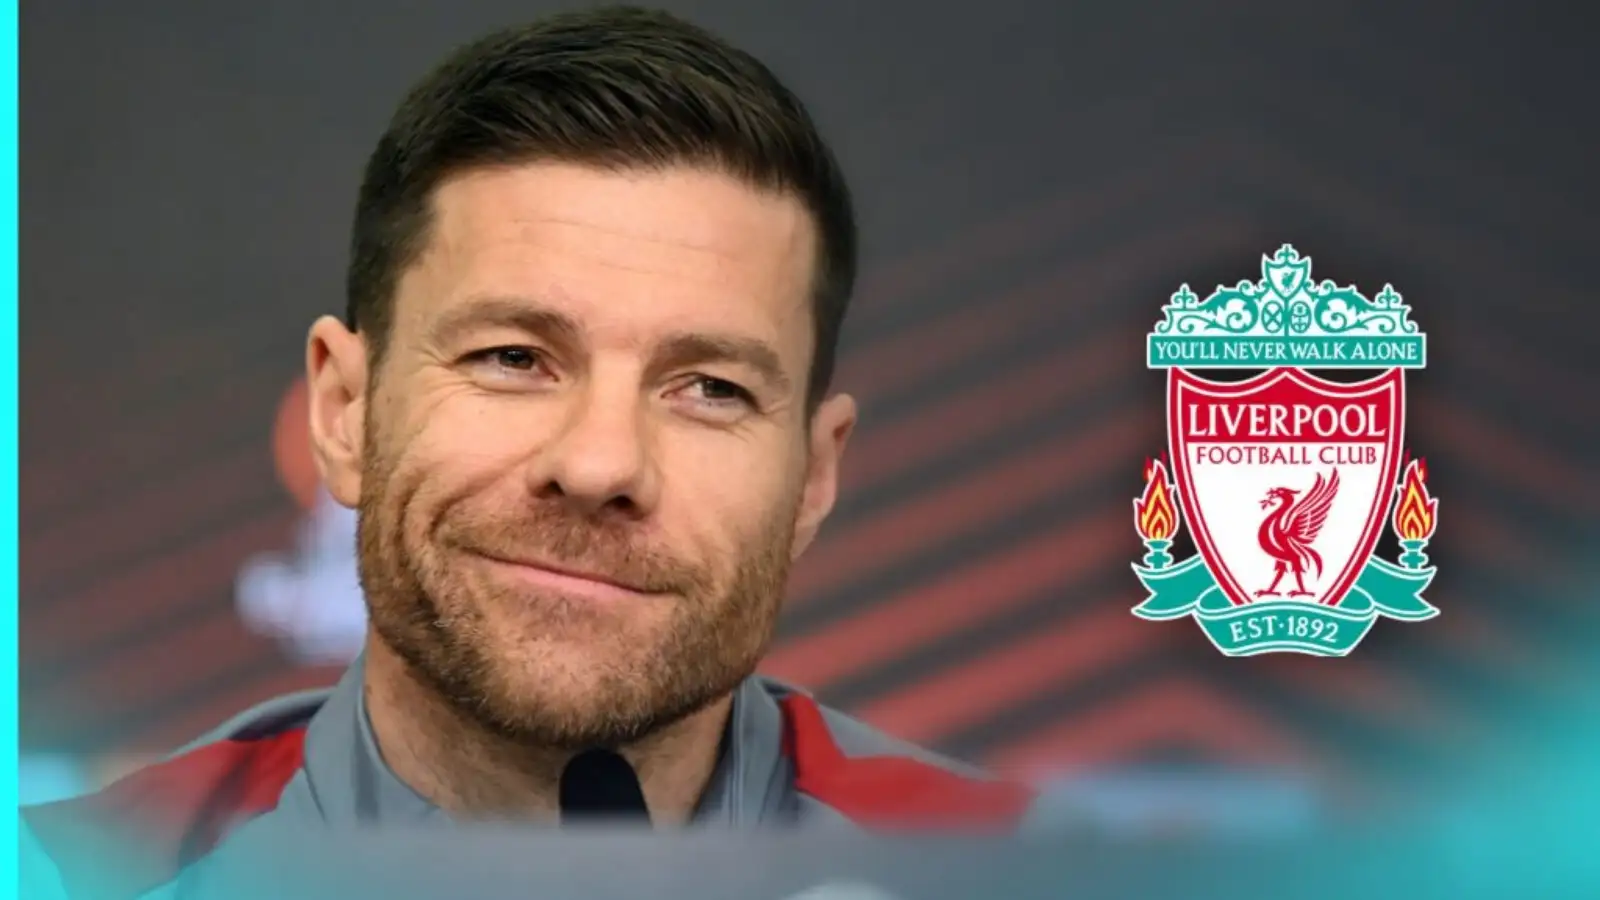 Liverpool target Xabi Alonso during a press conference.